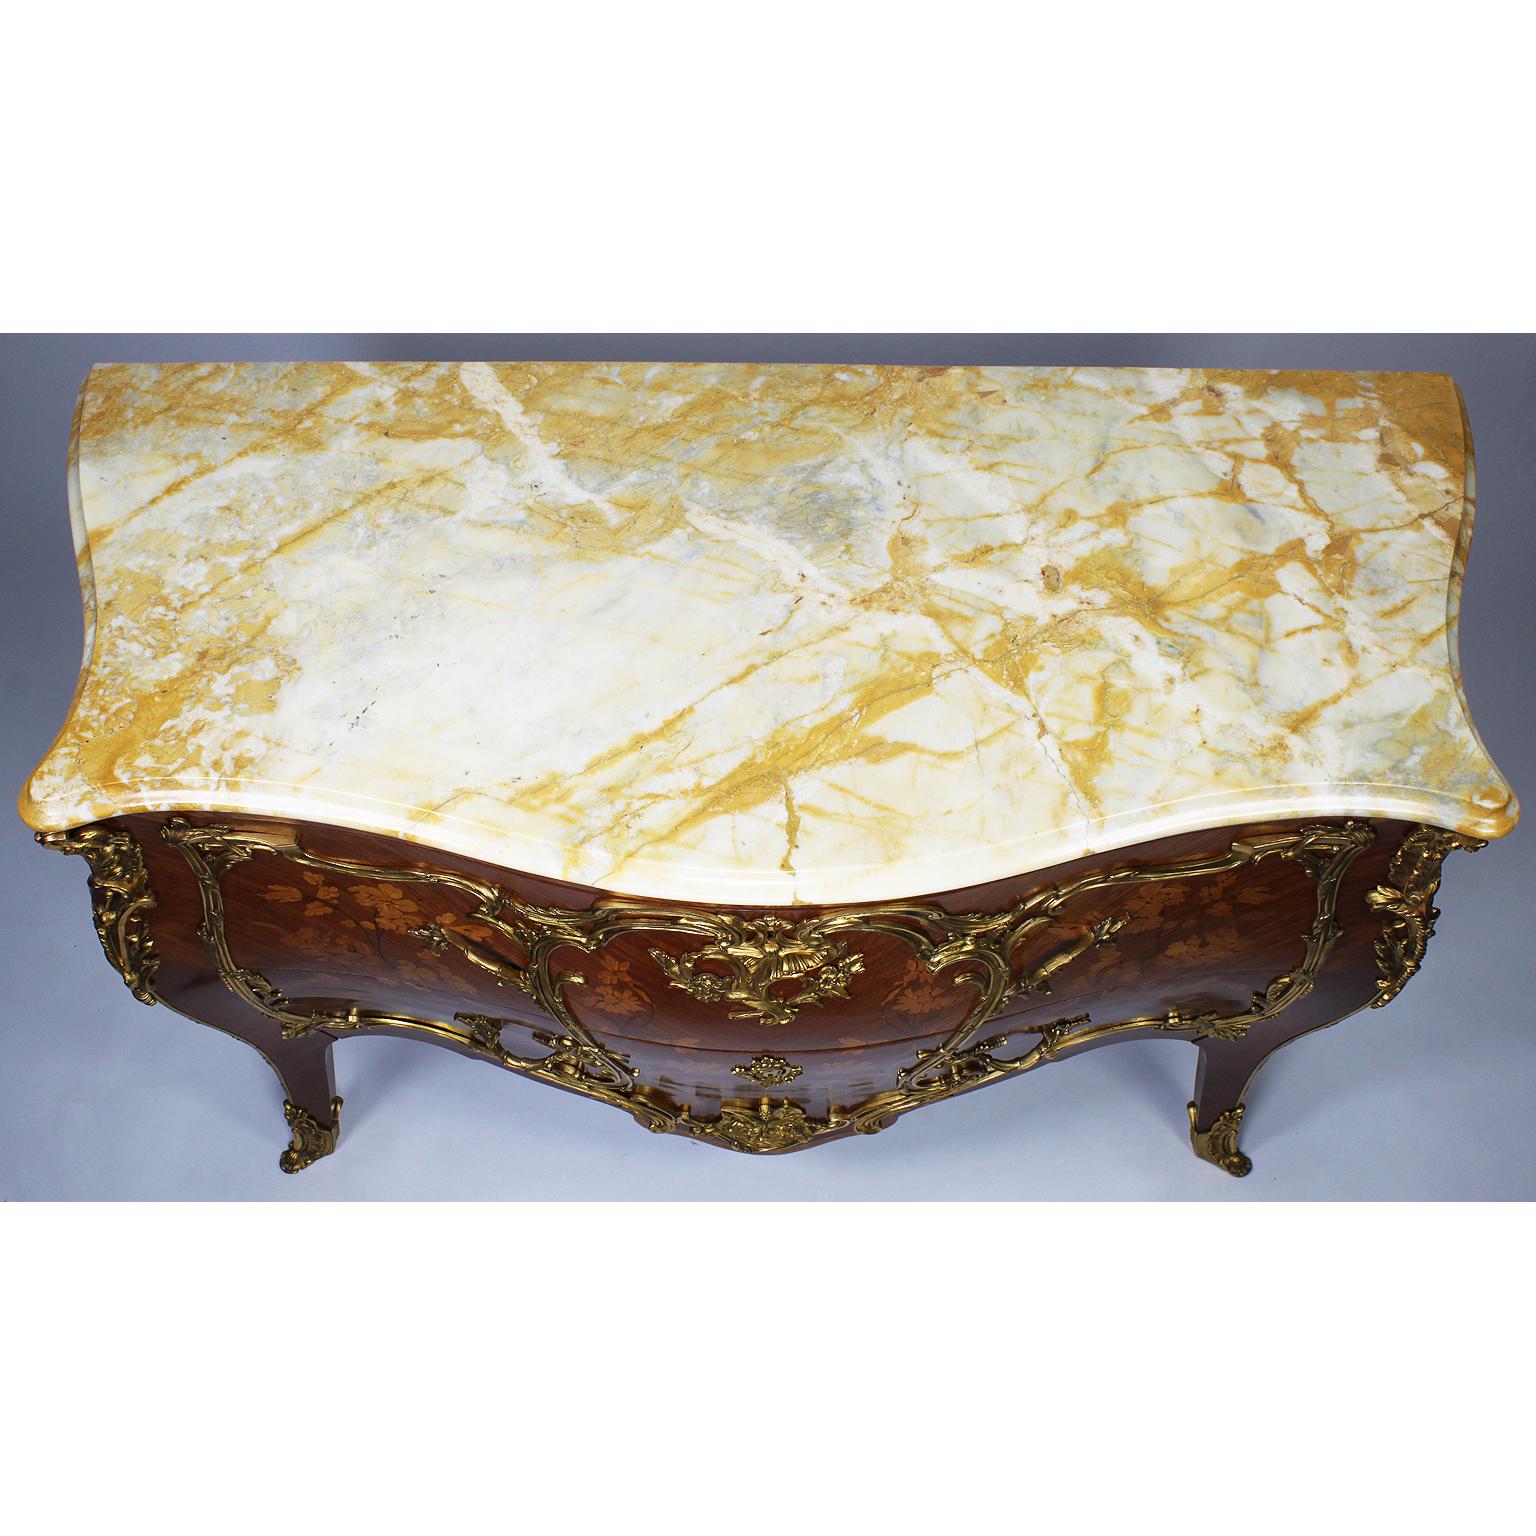 A 19th Century Louis XV Style Gilt-Bronze Mounted & Marquetry Bombé Commode For Sale 11